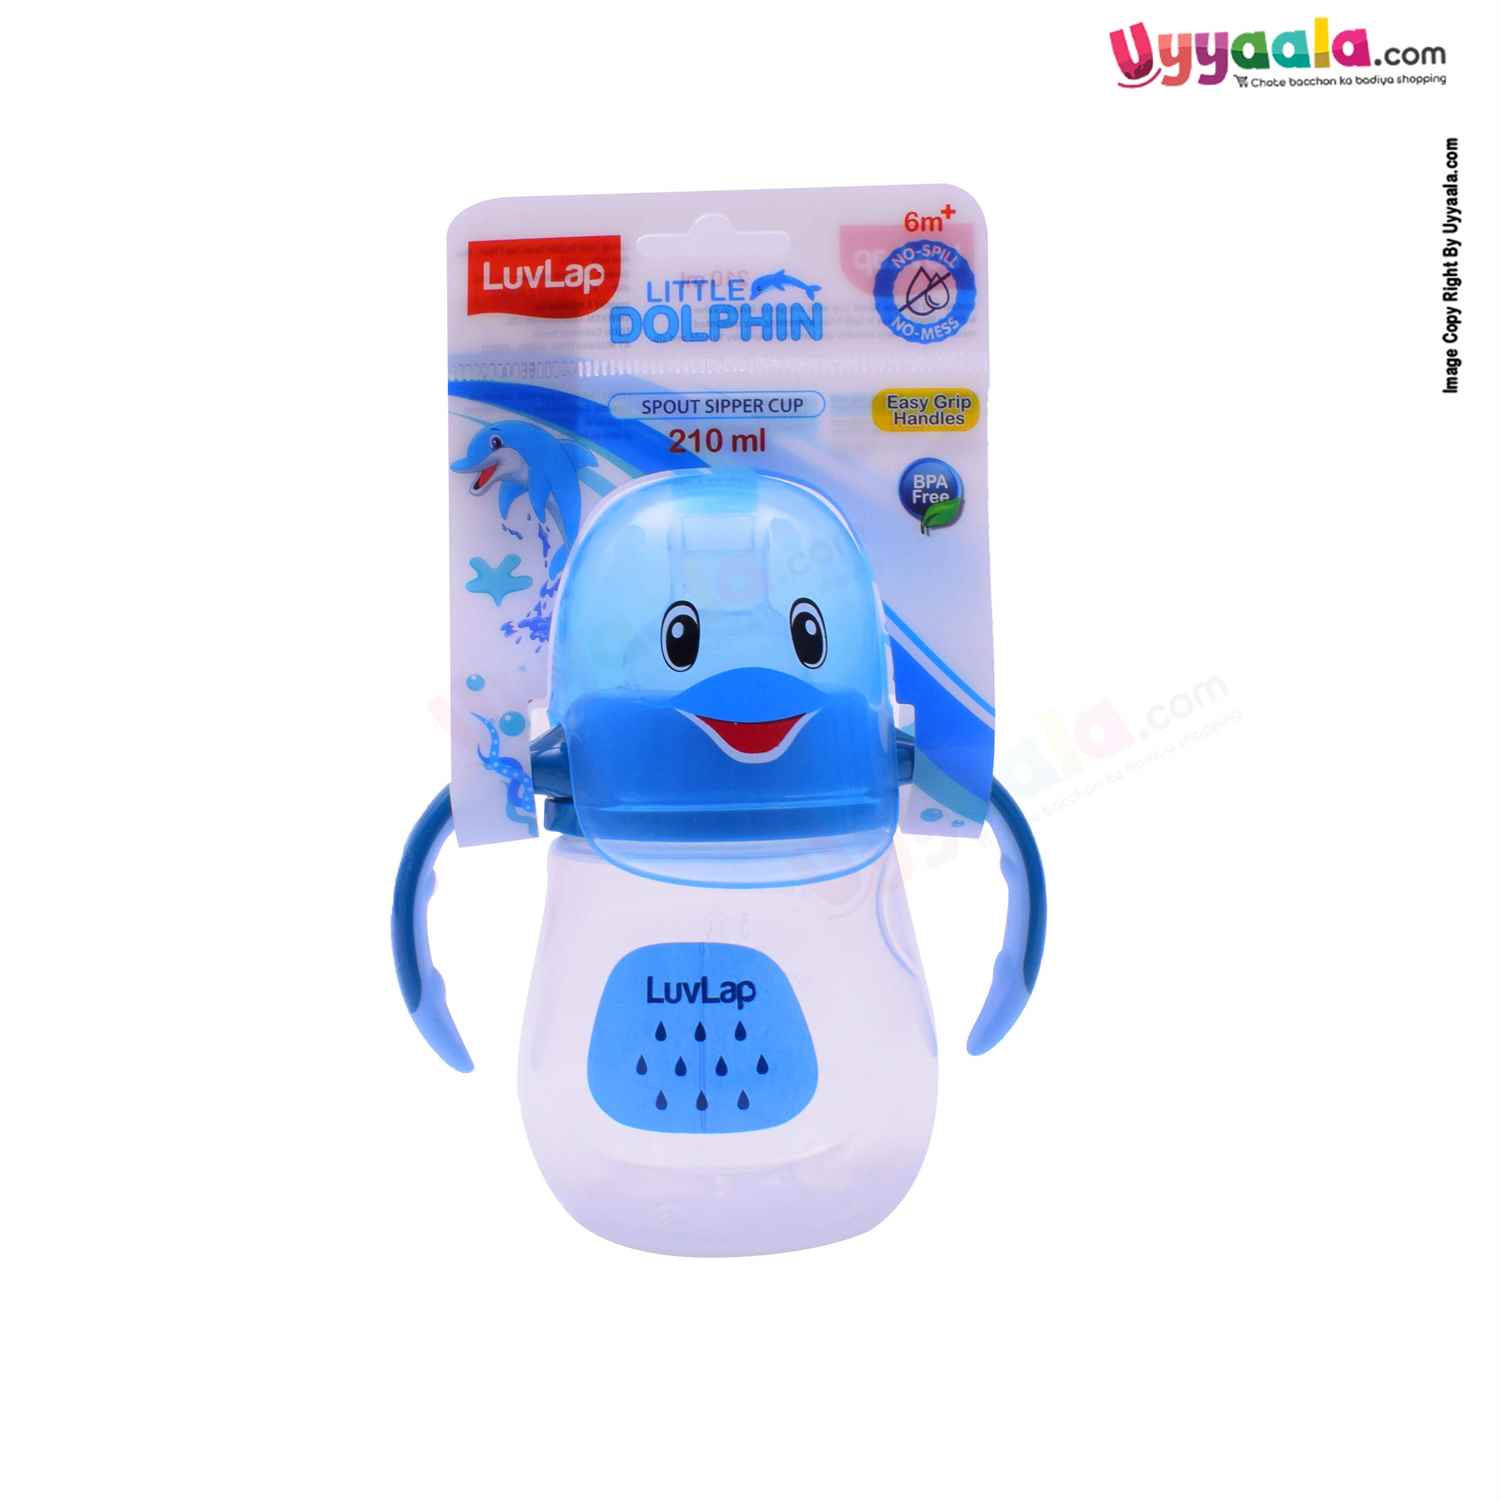 LUVLAP Little Dolphin Spout Sipper Cup with Easy Grip Twin Handle Bottle 210 ml 6+m Age, Blue